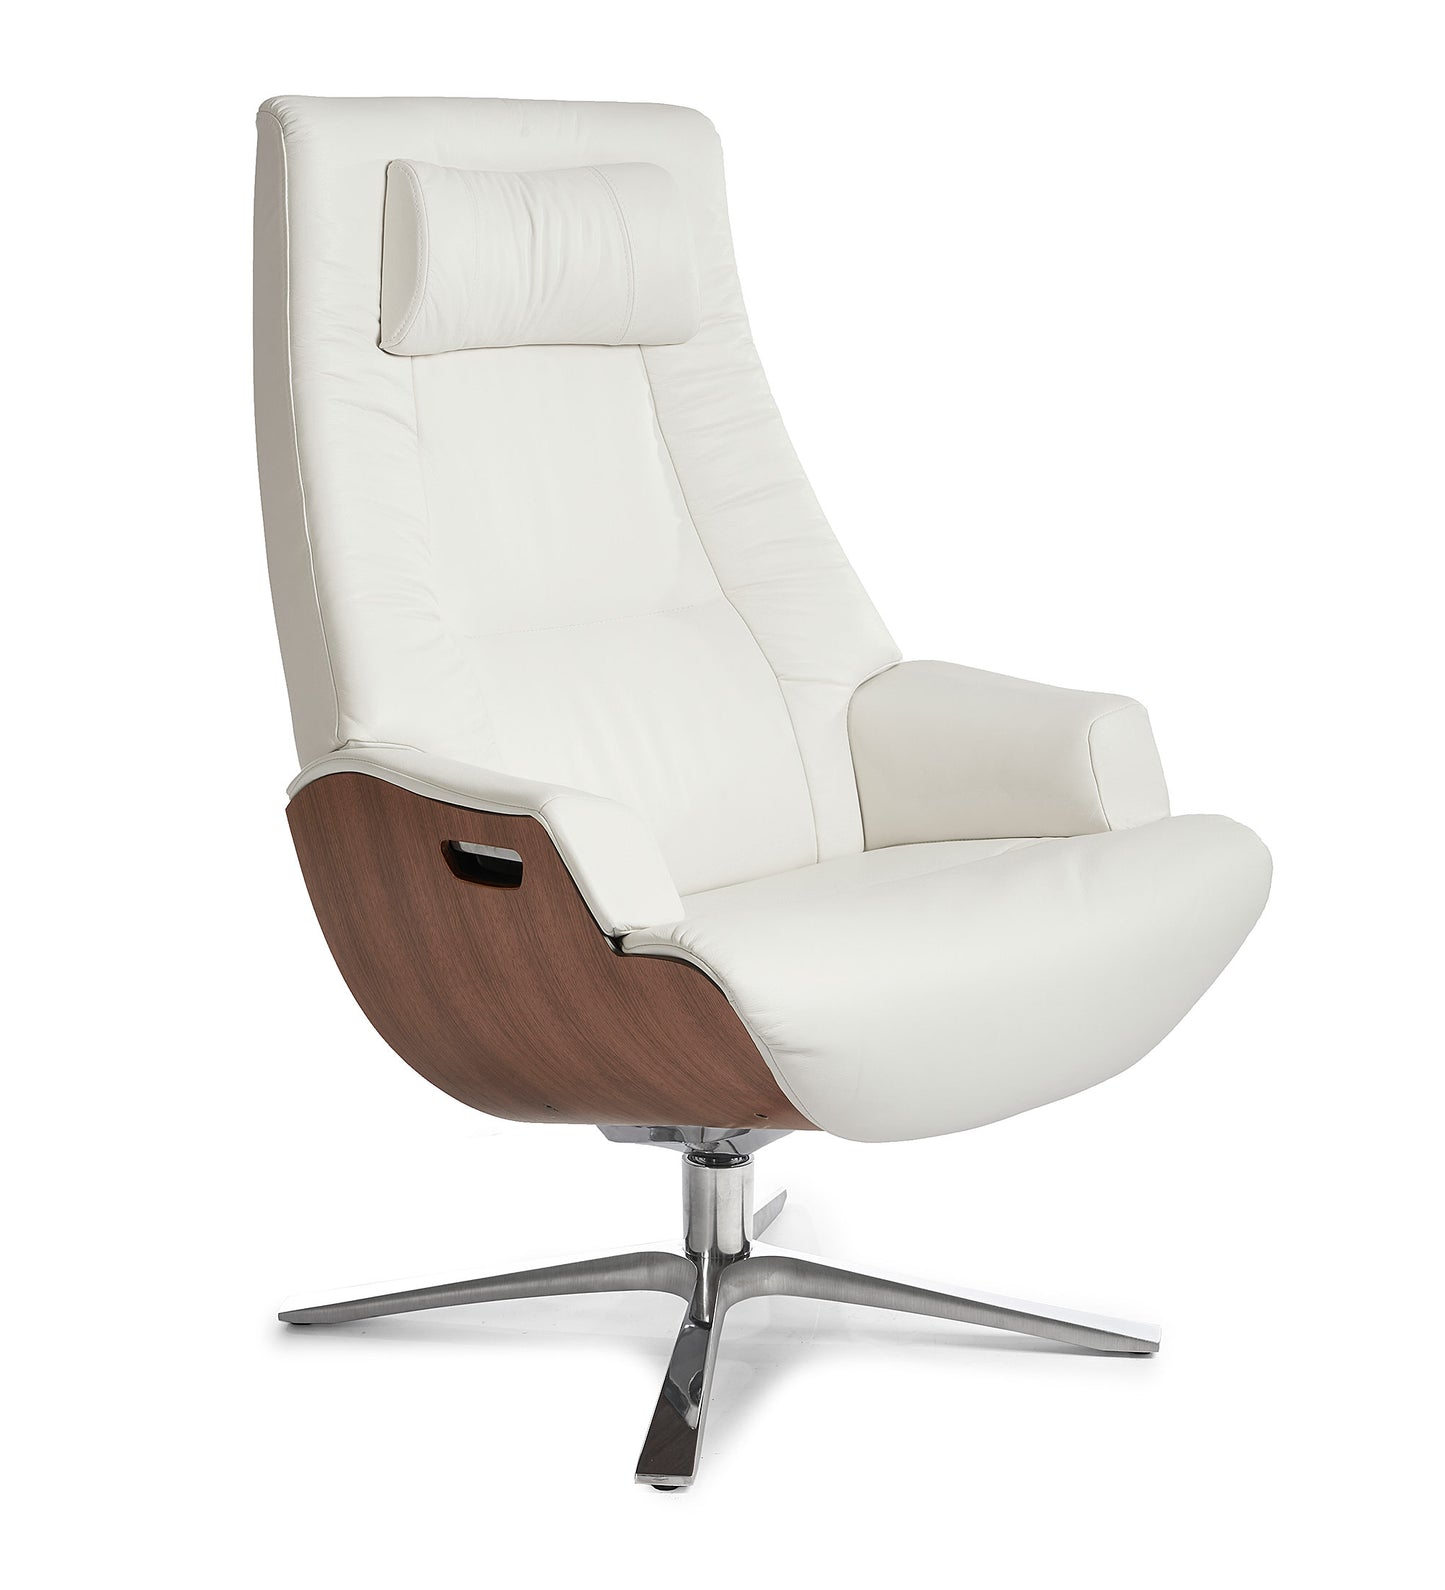 Conform Recliner Partner with Footstool